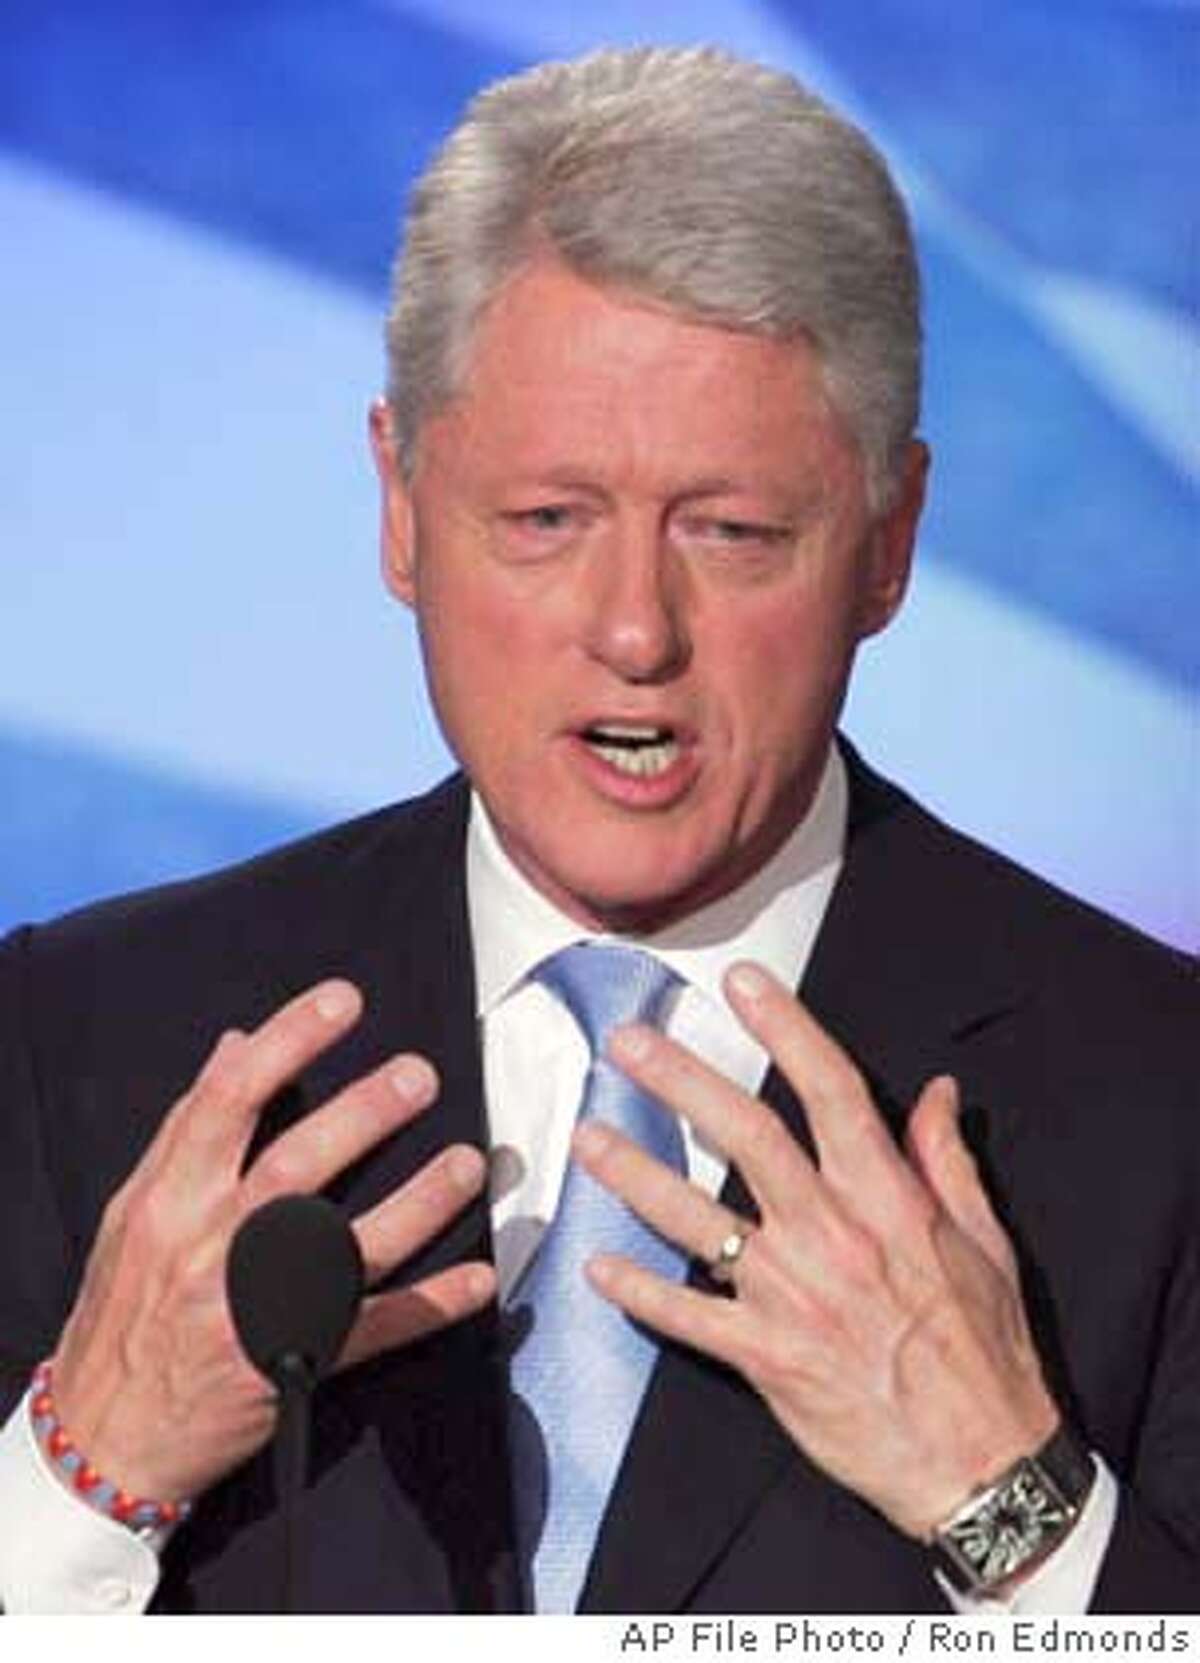 **FILE**Former President Bill Clinton speaks to delegates at the Democratic National Convention in this July 26, 2004 file photo, in Boston.Clinton had a successful quadruple heart bypass operation Monday, Sept. 6, 2004 to relieve clogged arteries, three days after checking himself into the hospital complaining of chest pain and shortness of breath " He is recovering normally at this point," said Dr. Craig R. Smith, the surgeon who led the four-hour operation. "I think right now everything looks straightforward." (AP Photo/Ron Edmonds) #######0422330058